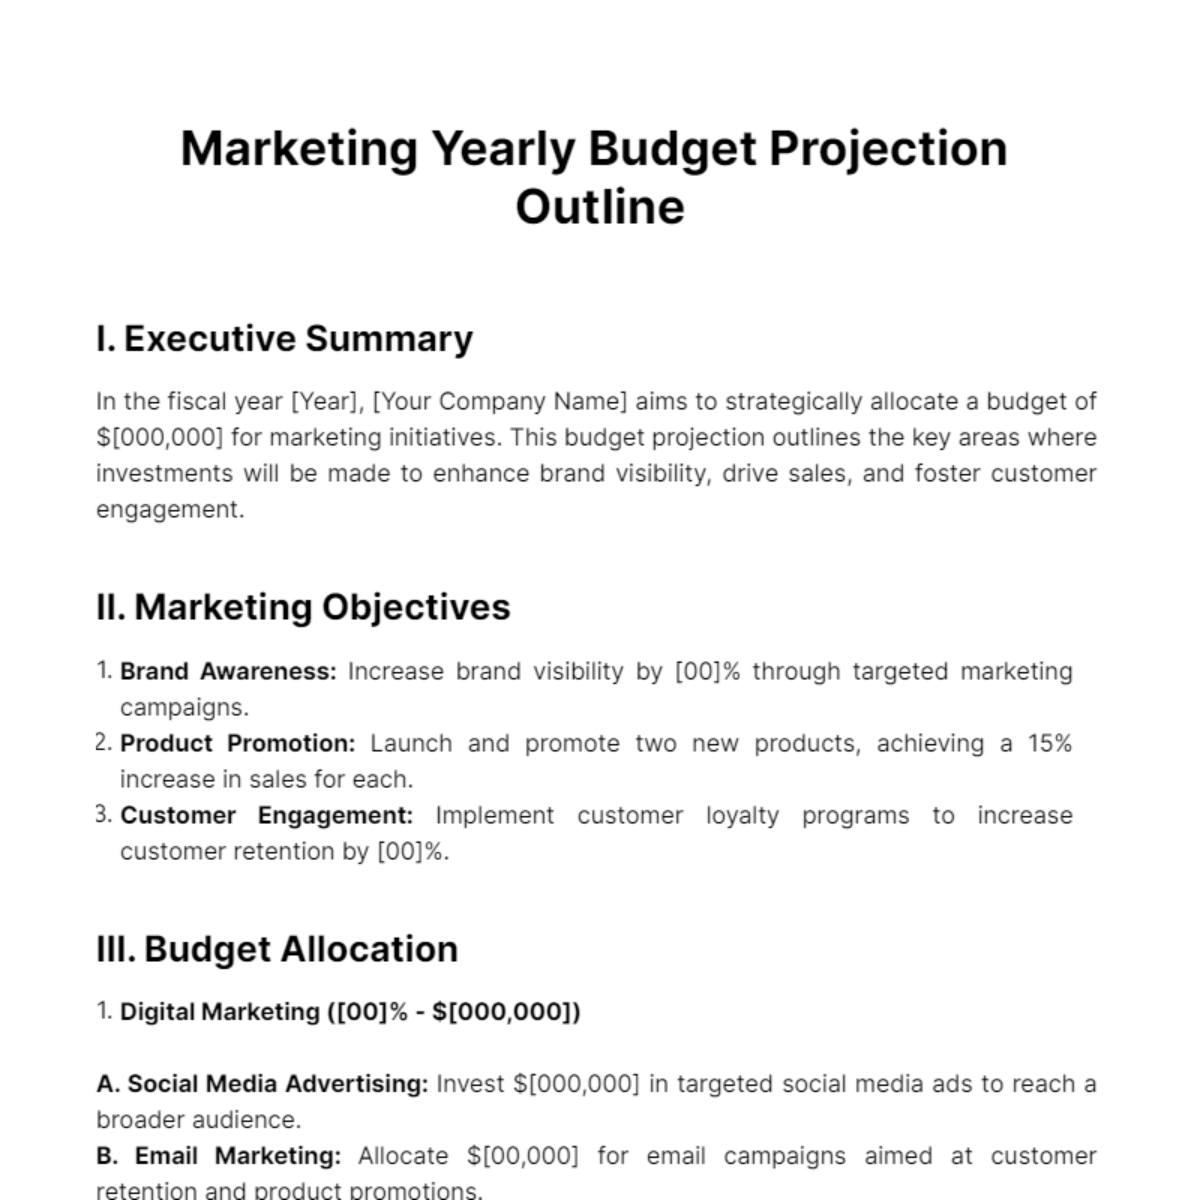 Marketing Yearly Budget Projection Outline Template